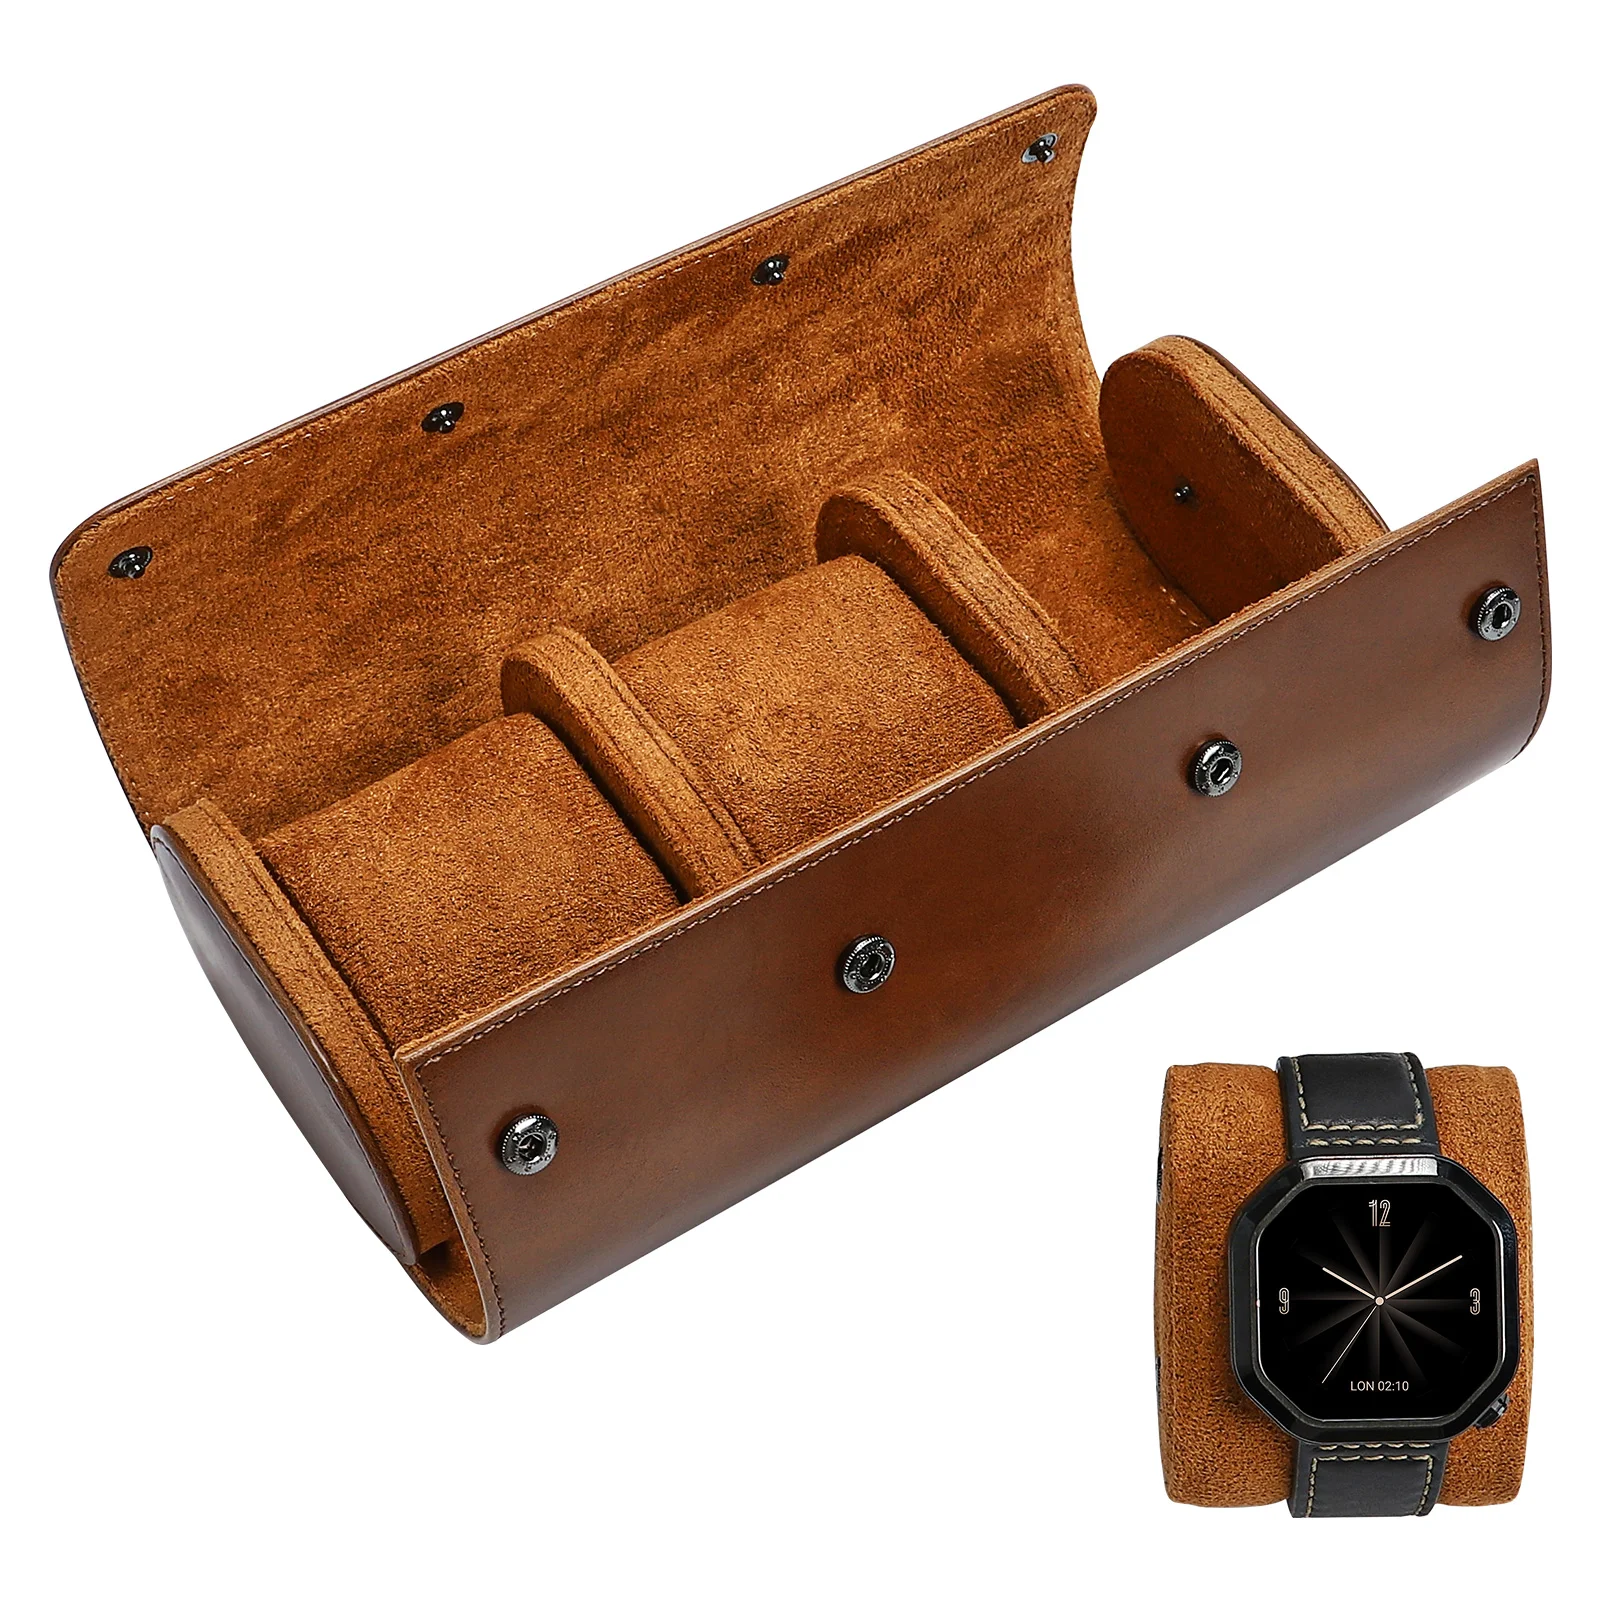 

Slots Watch Roll Travel Case Chic Portable Vintage Display Watch Storage Box with Slid in Out Watch Organizers